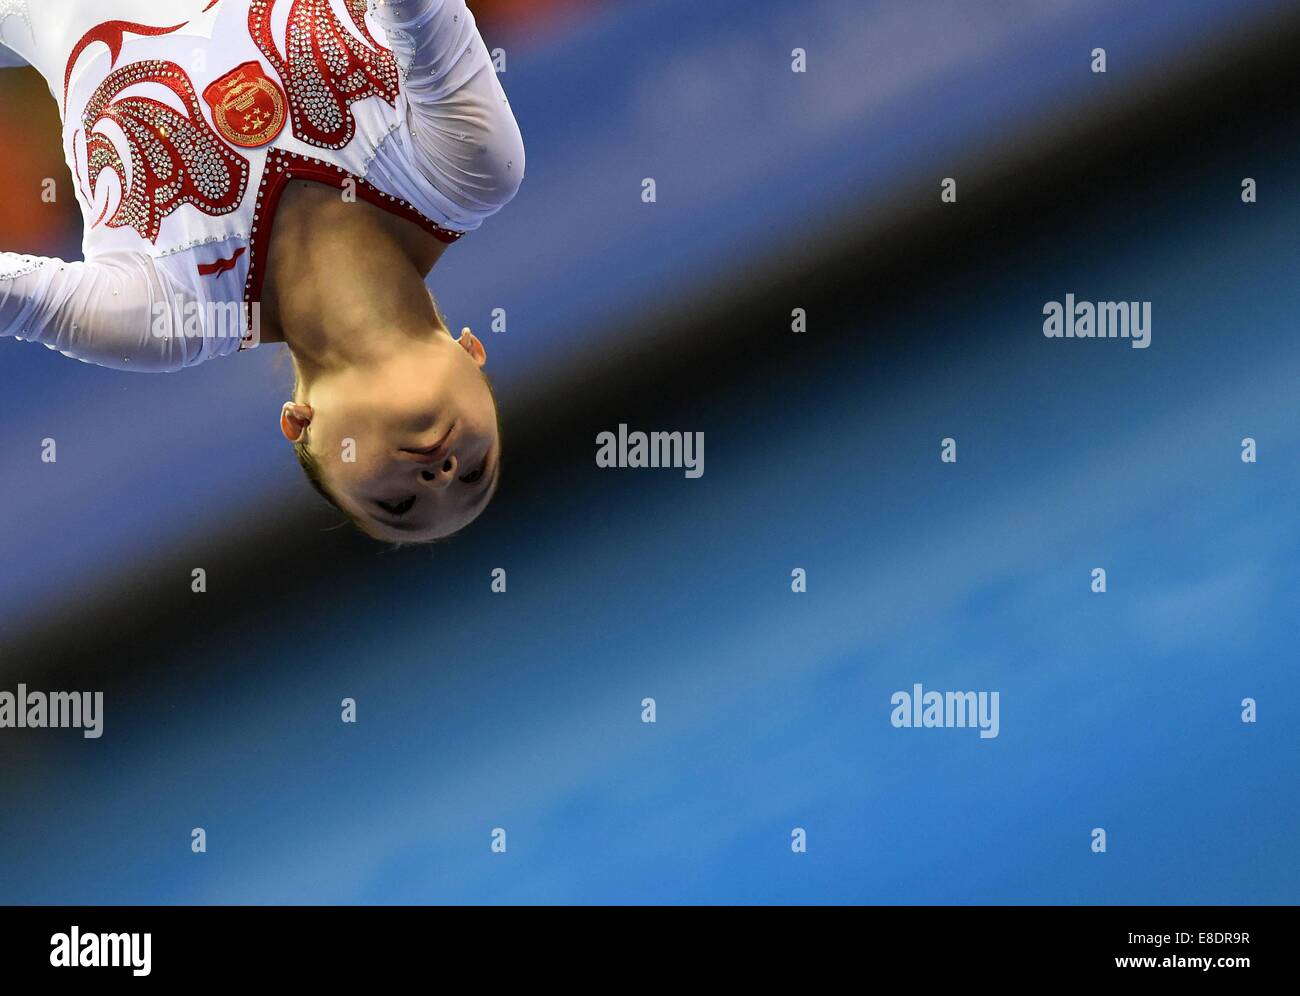 Nanning, China's Guangxi Zhuang Autonomous Region. 6th Oct, 2014. Yao Jinnan of China performs on the balance beam during the women's qualifying round of the 45th Gymnastics World Championships in Nanning, capital of south China's Guangxi Zhuang Autonomous Region, Oct. 6, 2014. The 45th FIG Artistic Gymnastics World Championships lasts from Oct. 3 to 12 in Nanning. Credit:  Huang Xiaobang/Xinhua/Alamy Live News Stock Photo